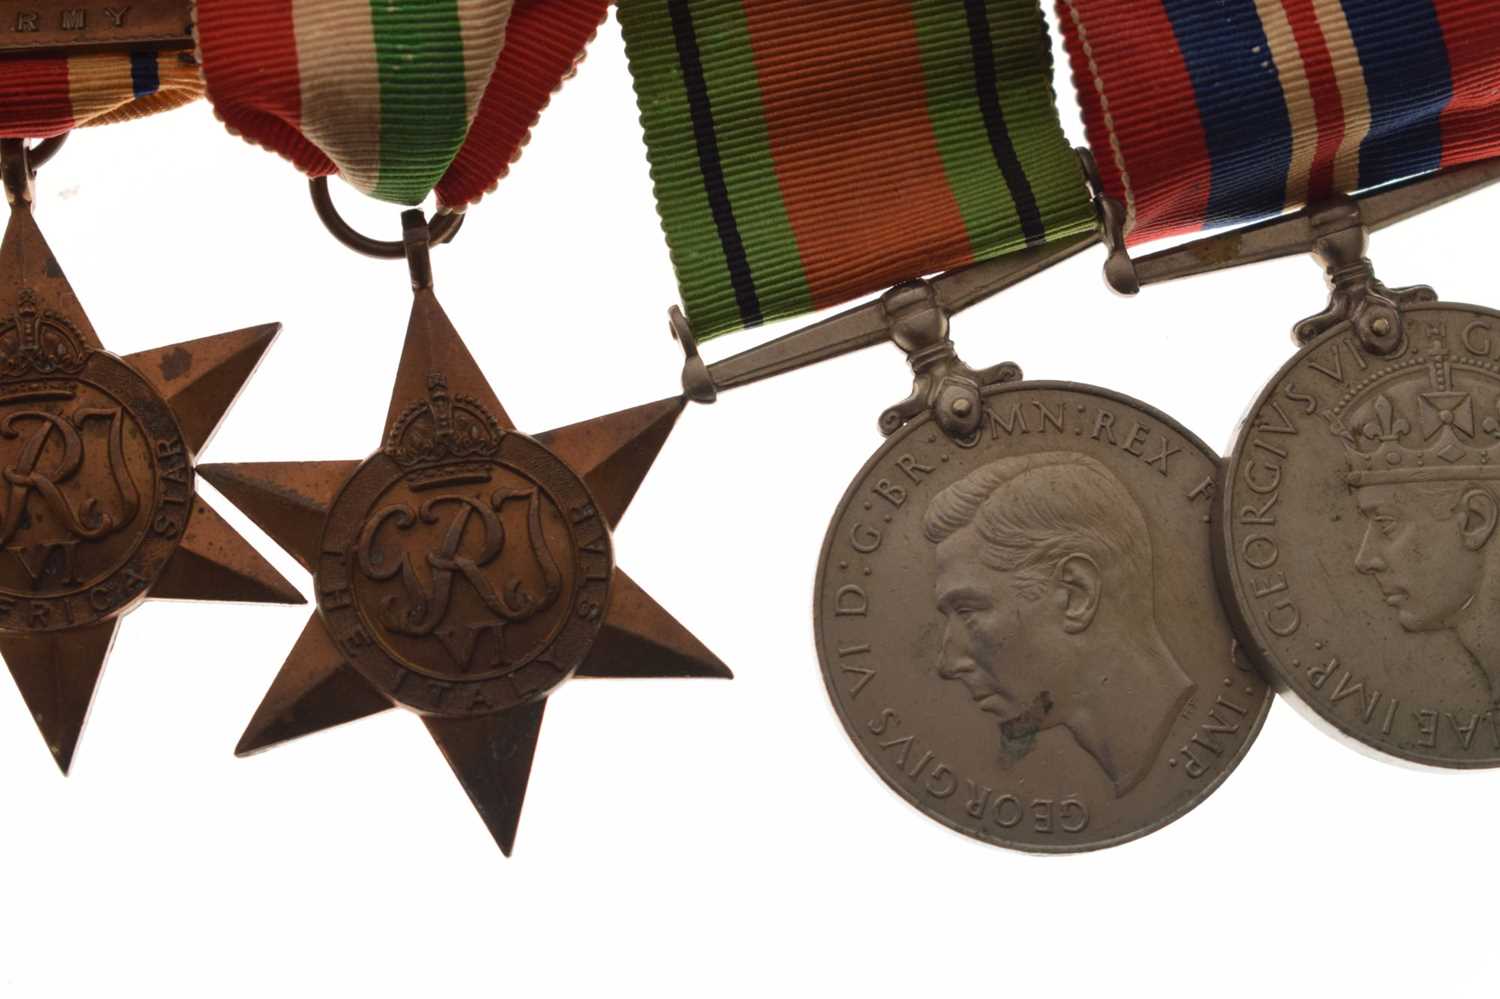 British First and Second World War medals - Image 3 of 13